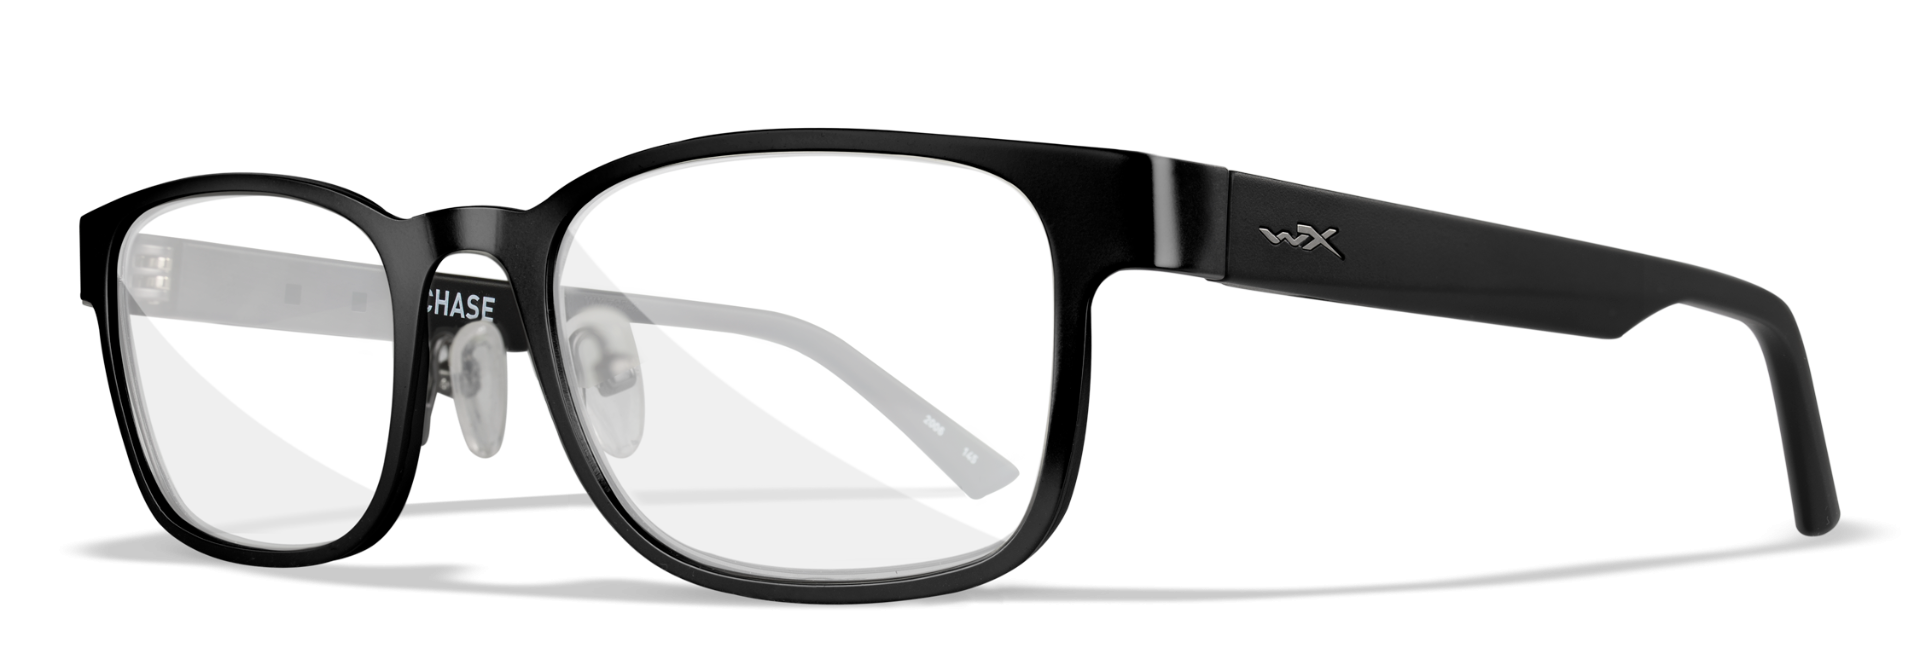 Wiley-X Chase Safety Glasses